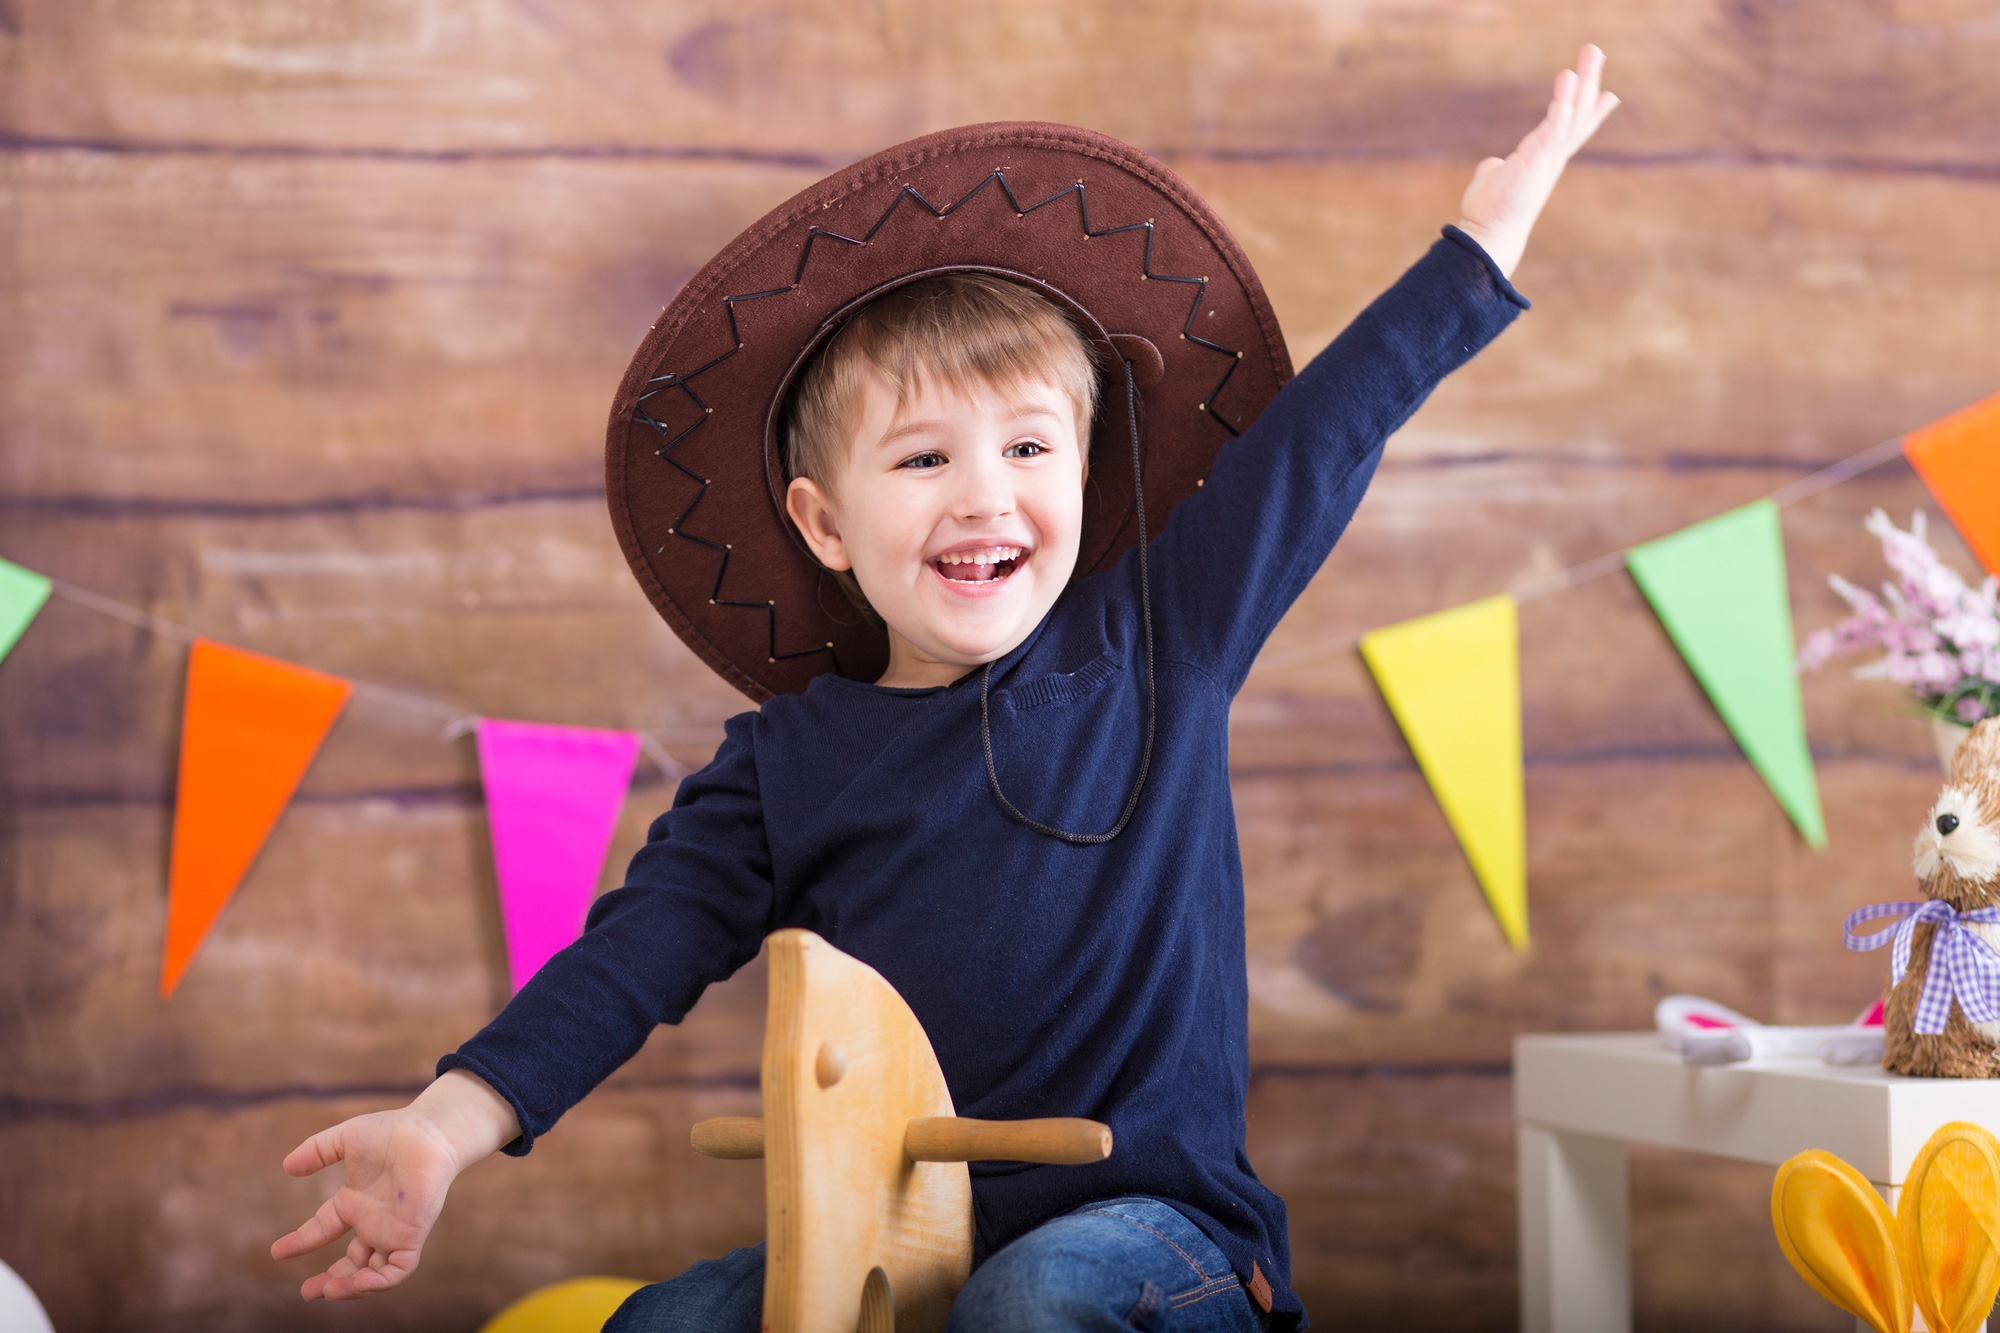 6 Steps for a Cowboy Themed Room for Kids